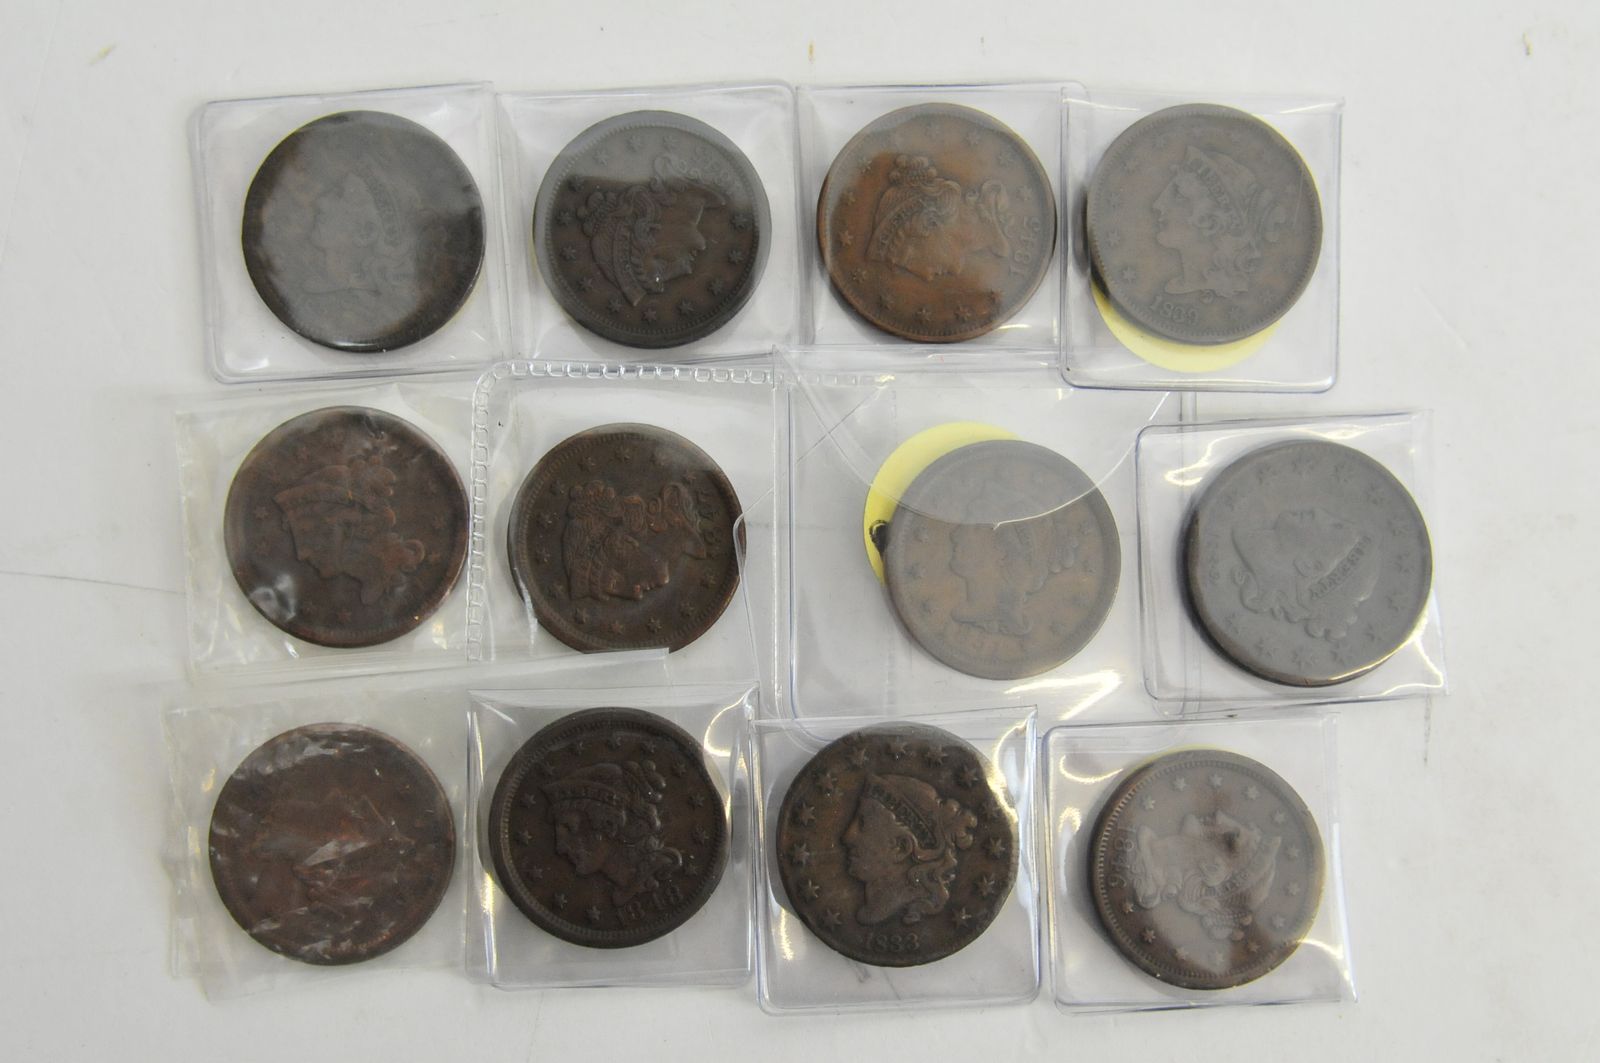 A bag of twelve of American one cent pieces dating from 1832 onwards